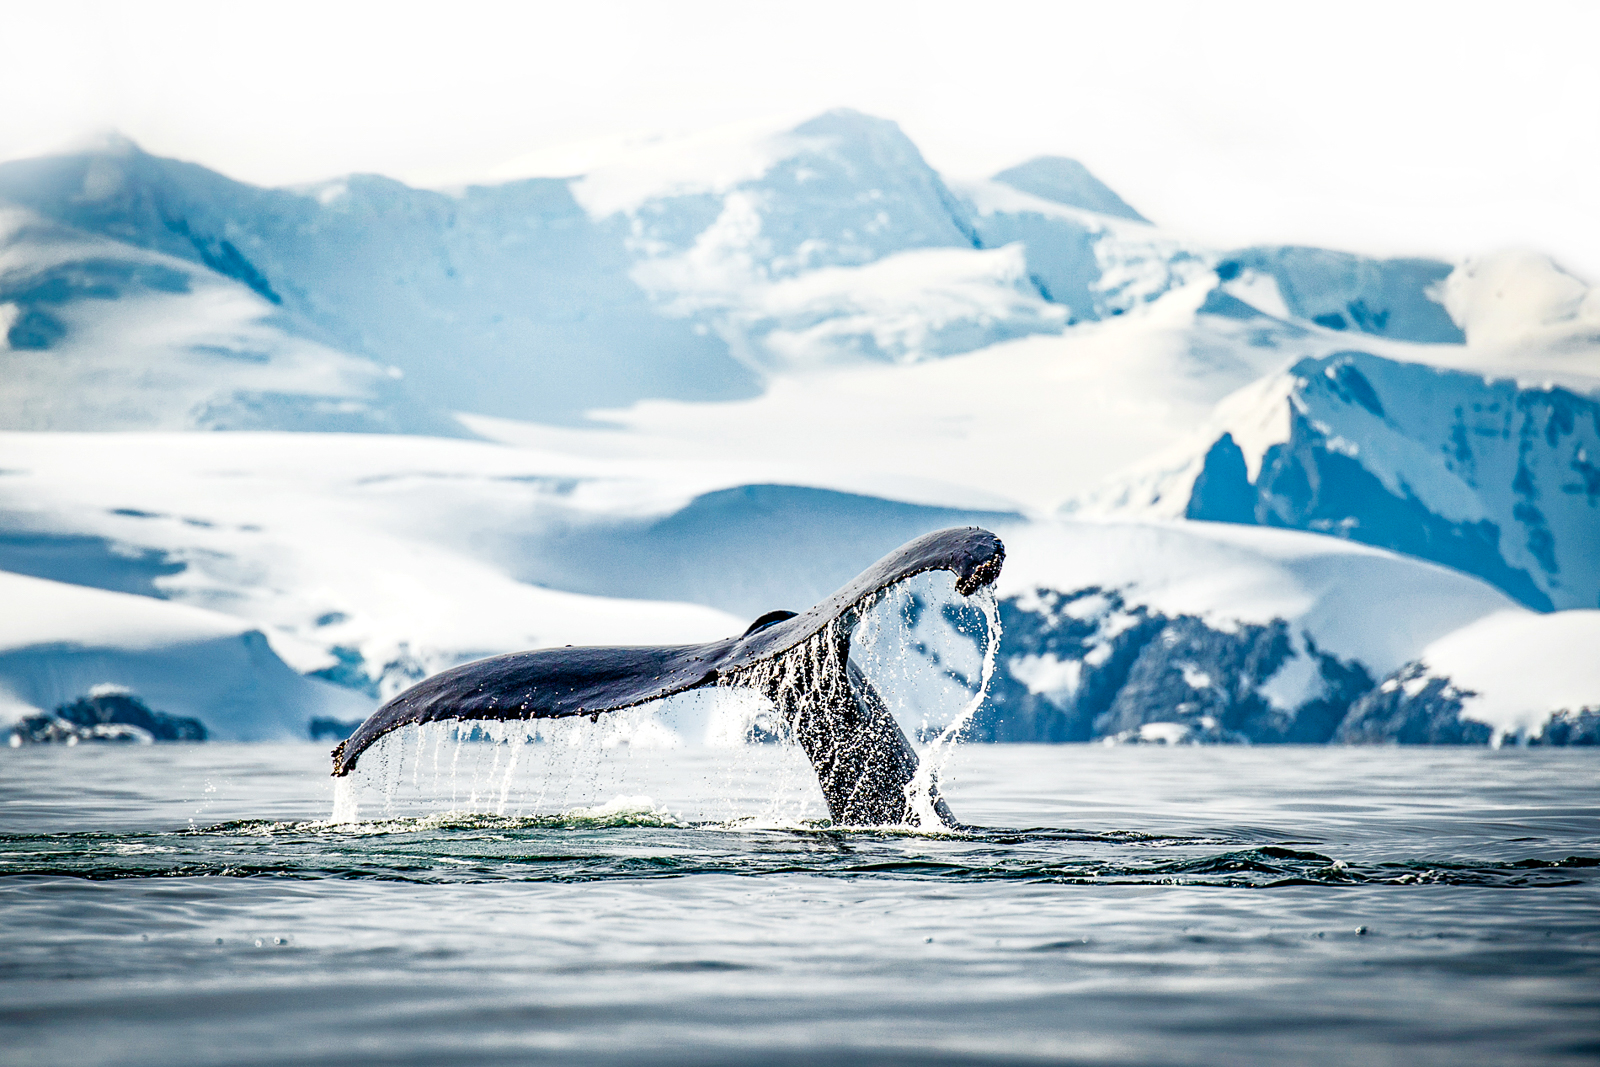 A whale breaching in the Antarctic spotted from Ponant's Le Boreal cruise ship